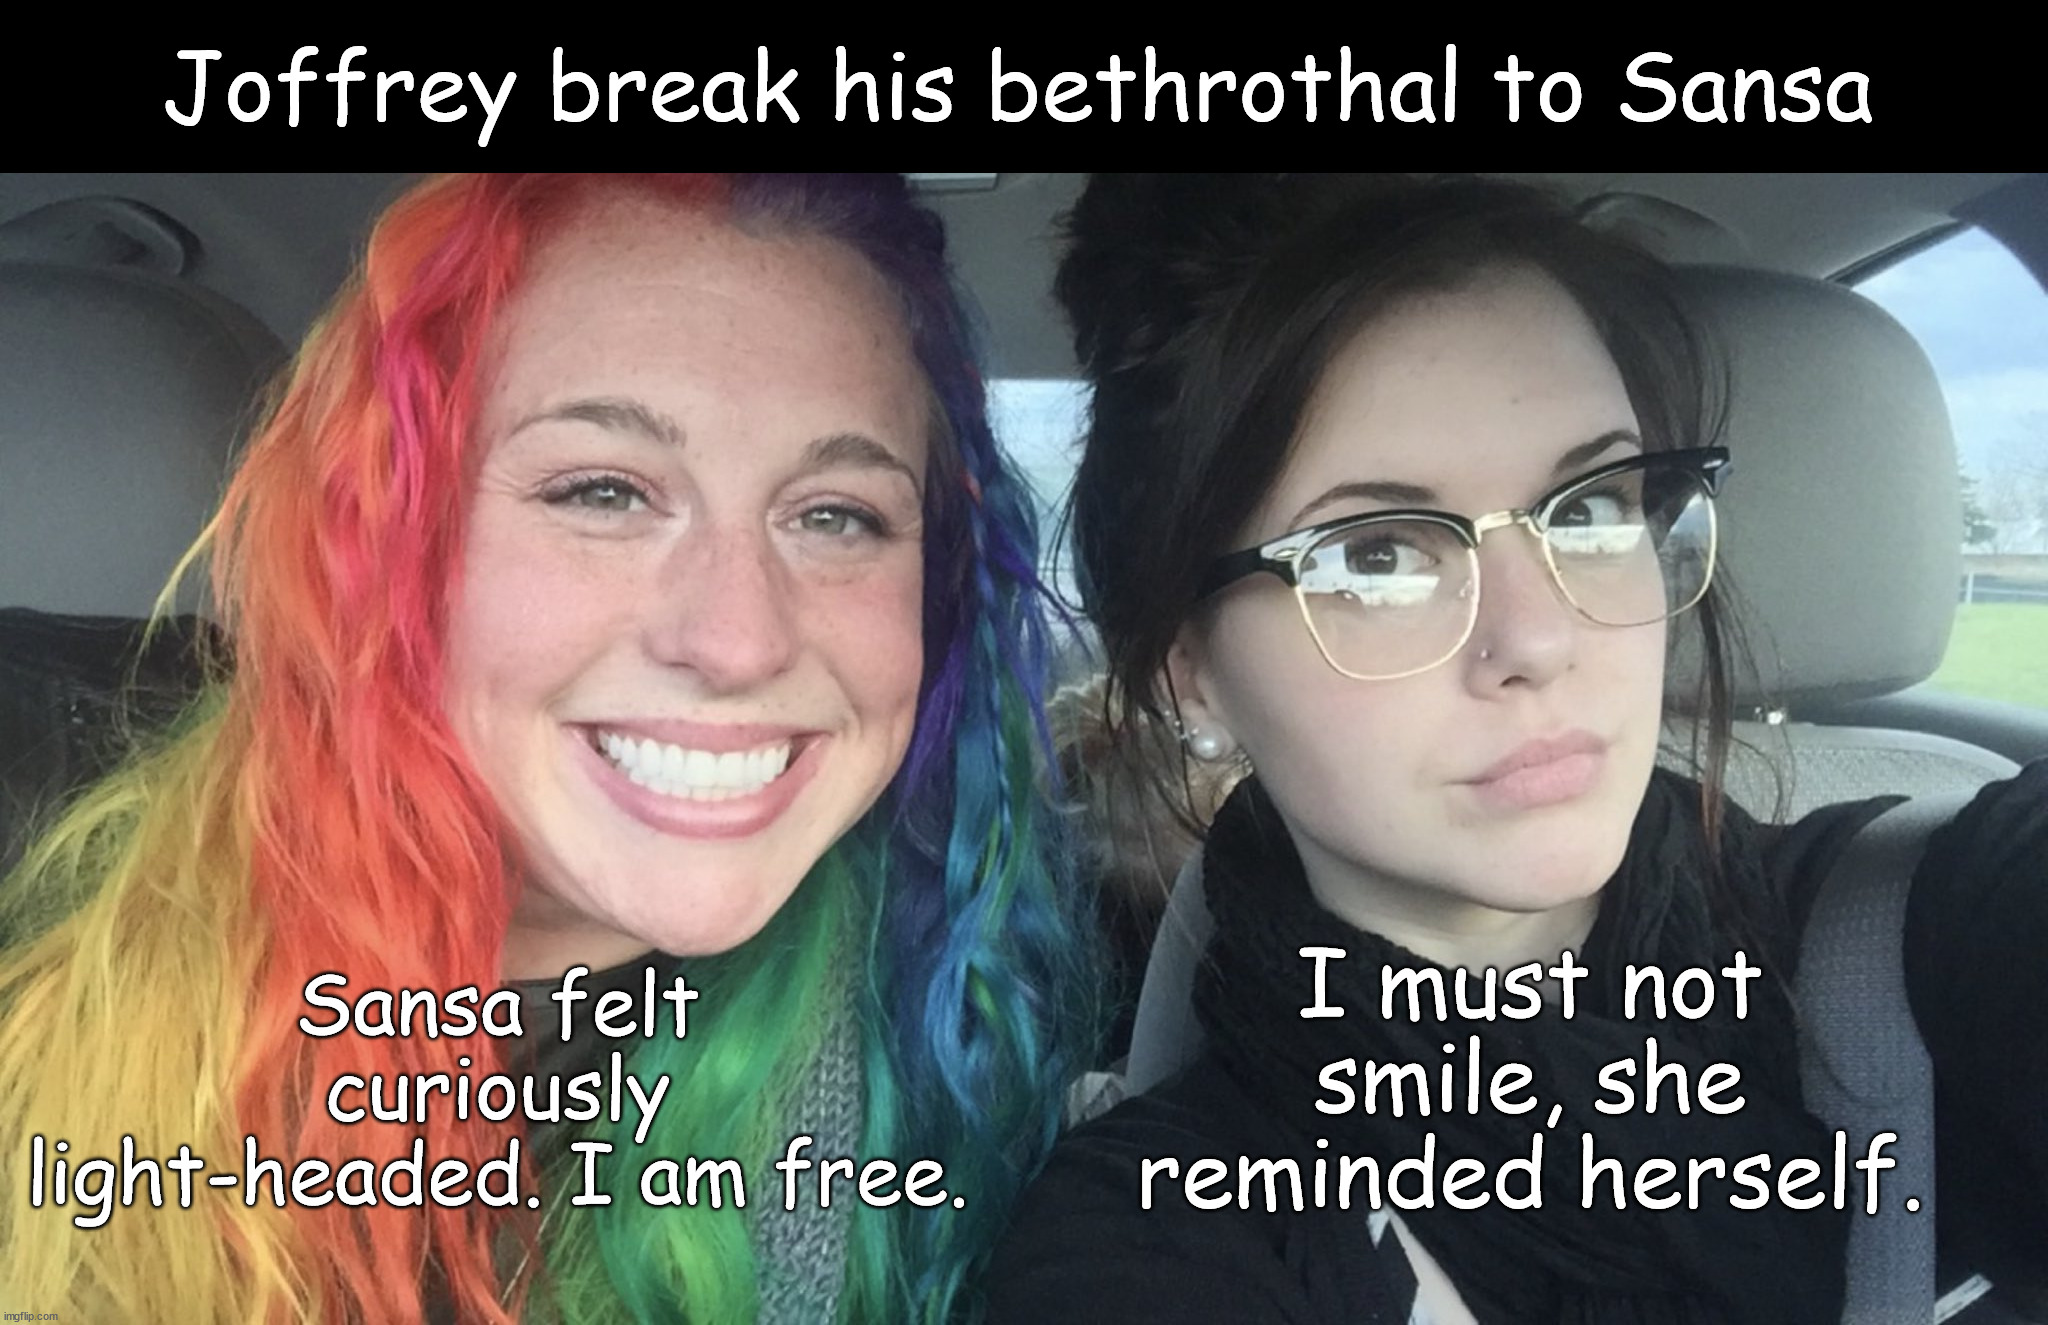 rainbow hair and goth | Joffrey break his bethrothal to Sansa; I must not smile, she reminded herself. Sansa felt curiously light-headed. I am free. | image tagged in rainbow hair and goth,sansa stark,joffrey baratheon,asoiaf,a song of ice and fire | made w/ Imgflip meme maker